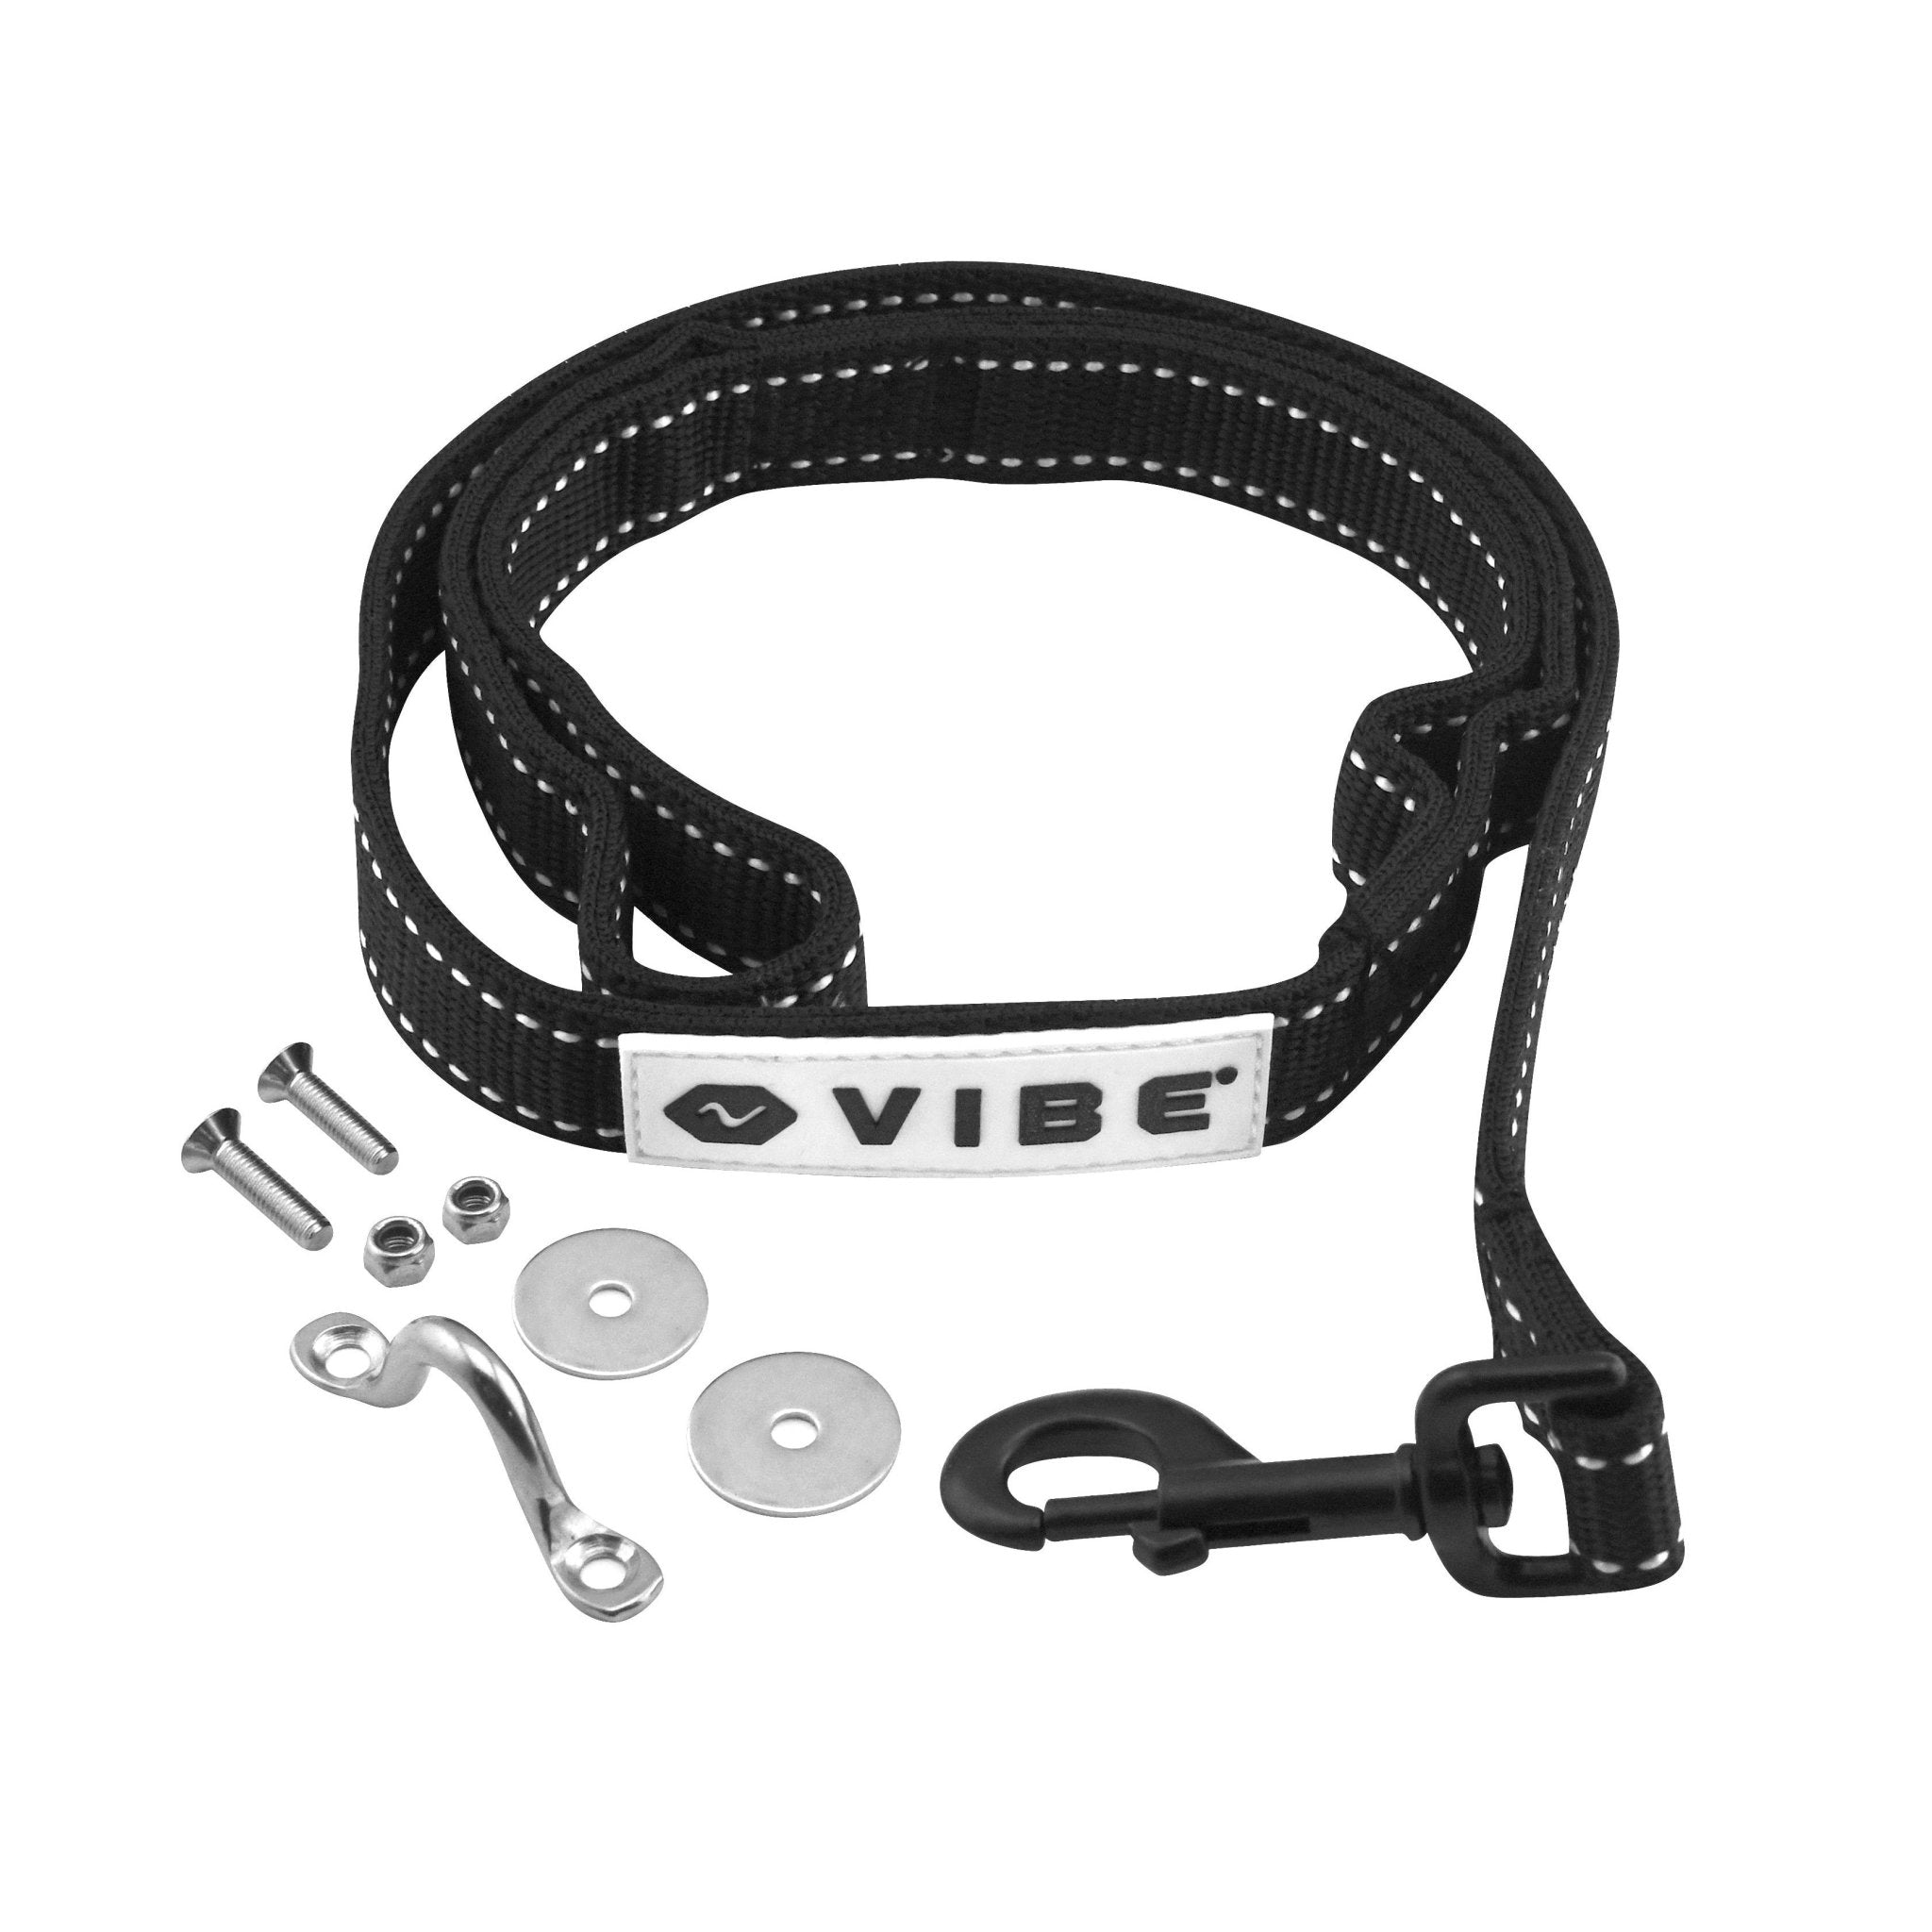 Stand Up Assist Strap - Vibe Kayaks